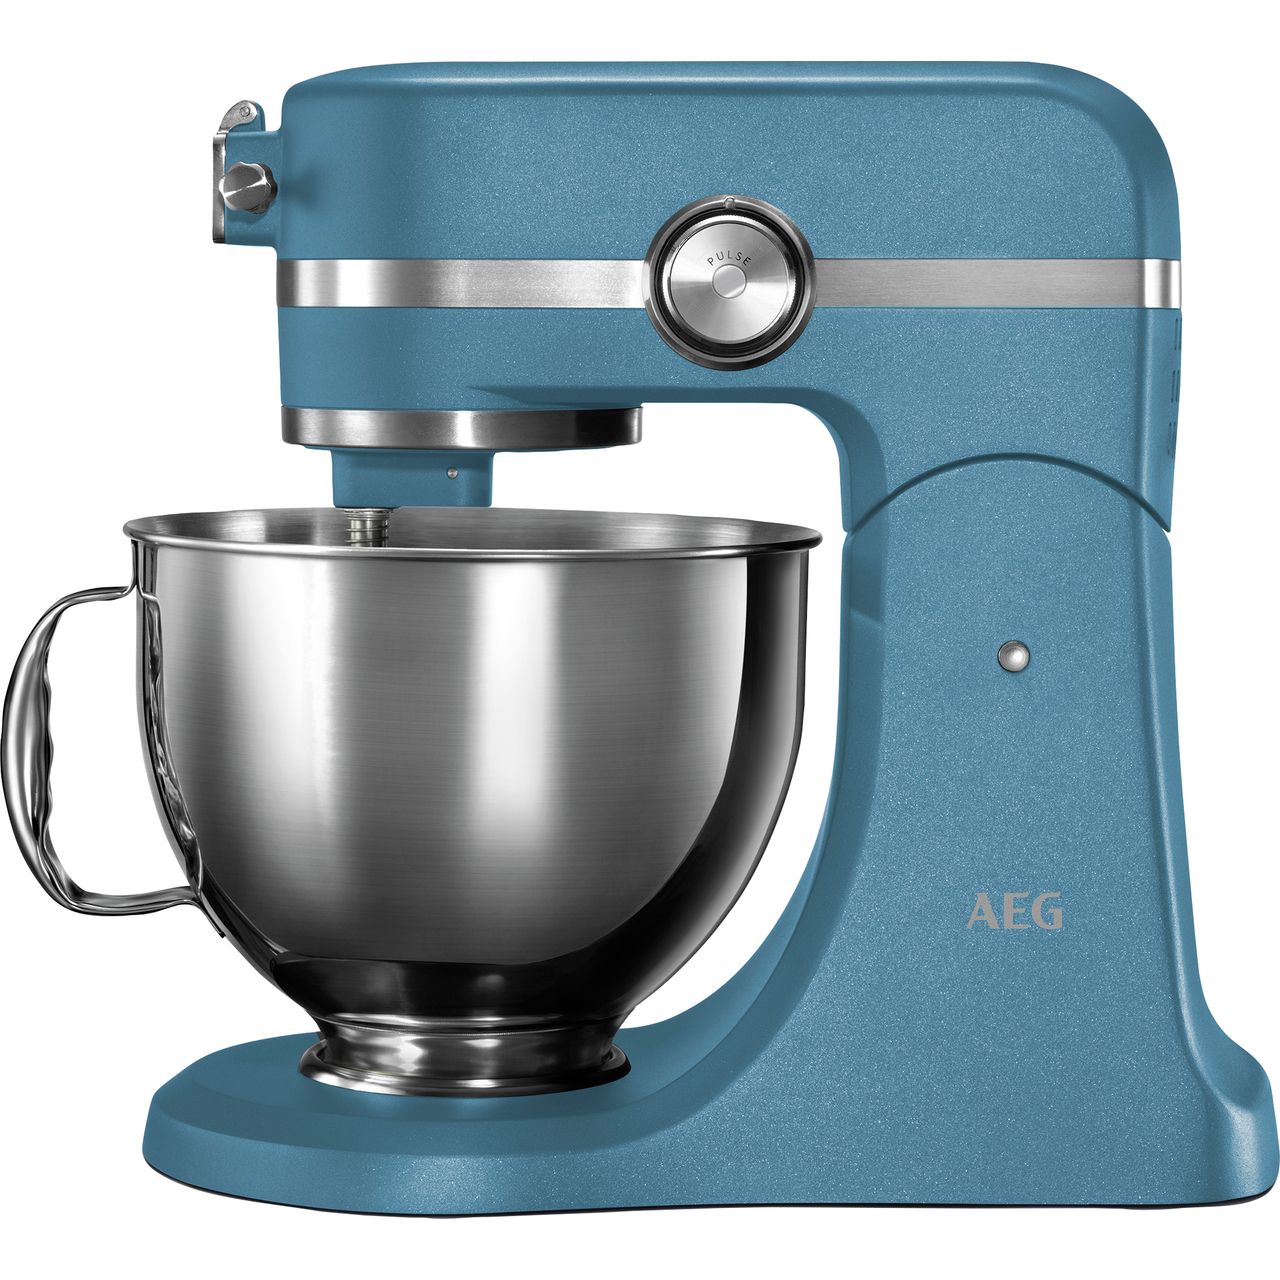 AEG Ultramix KM5560 Stand Mixer with 4.8 Litre Bowl Review